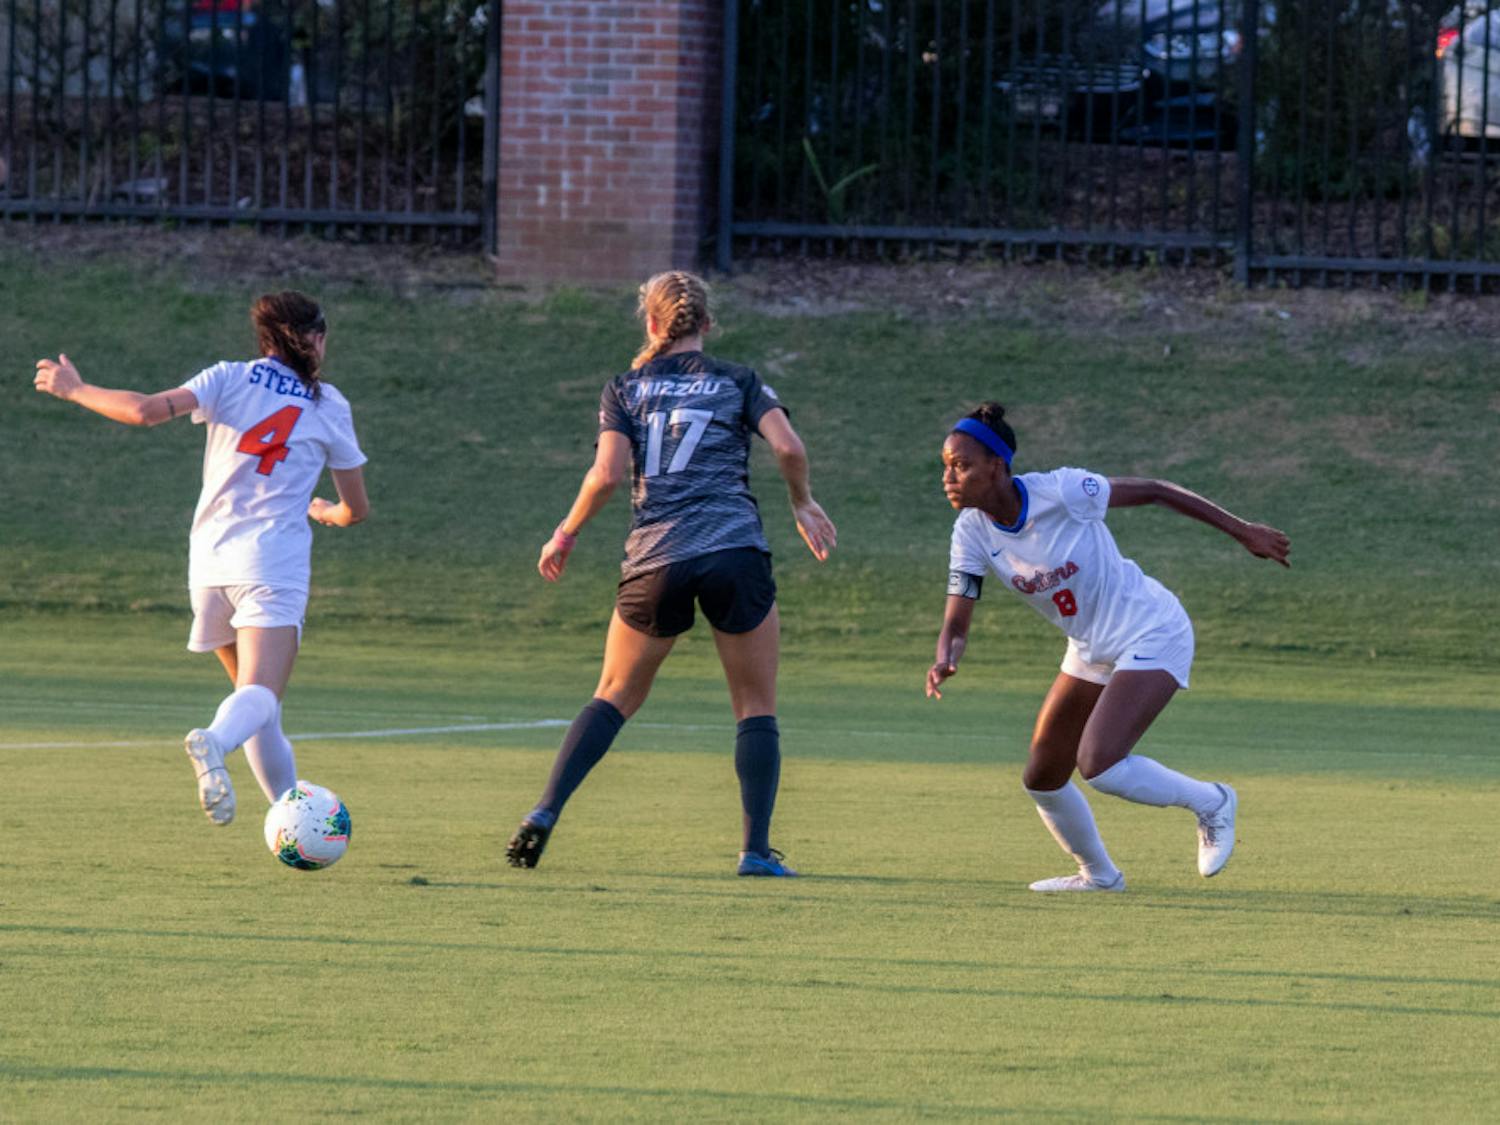 Freshman midfielder Laney Steed notched a game-tying goal in Florida’s 4-2 win over Kentucky, which marked the first goal of her collegiate career.